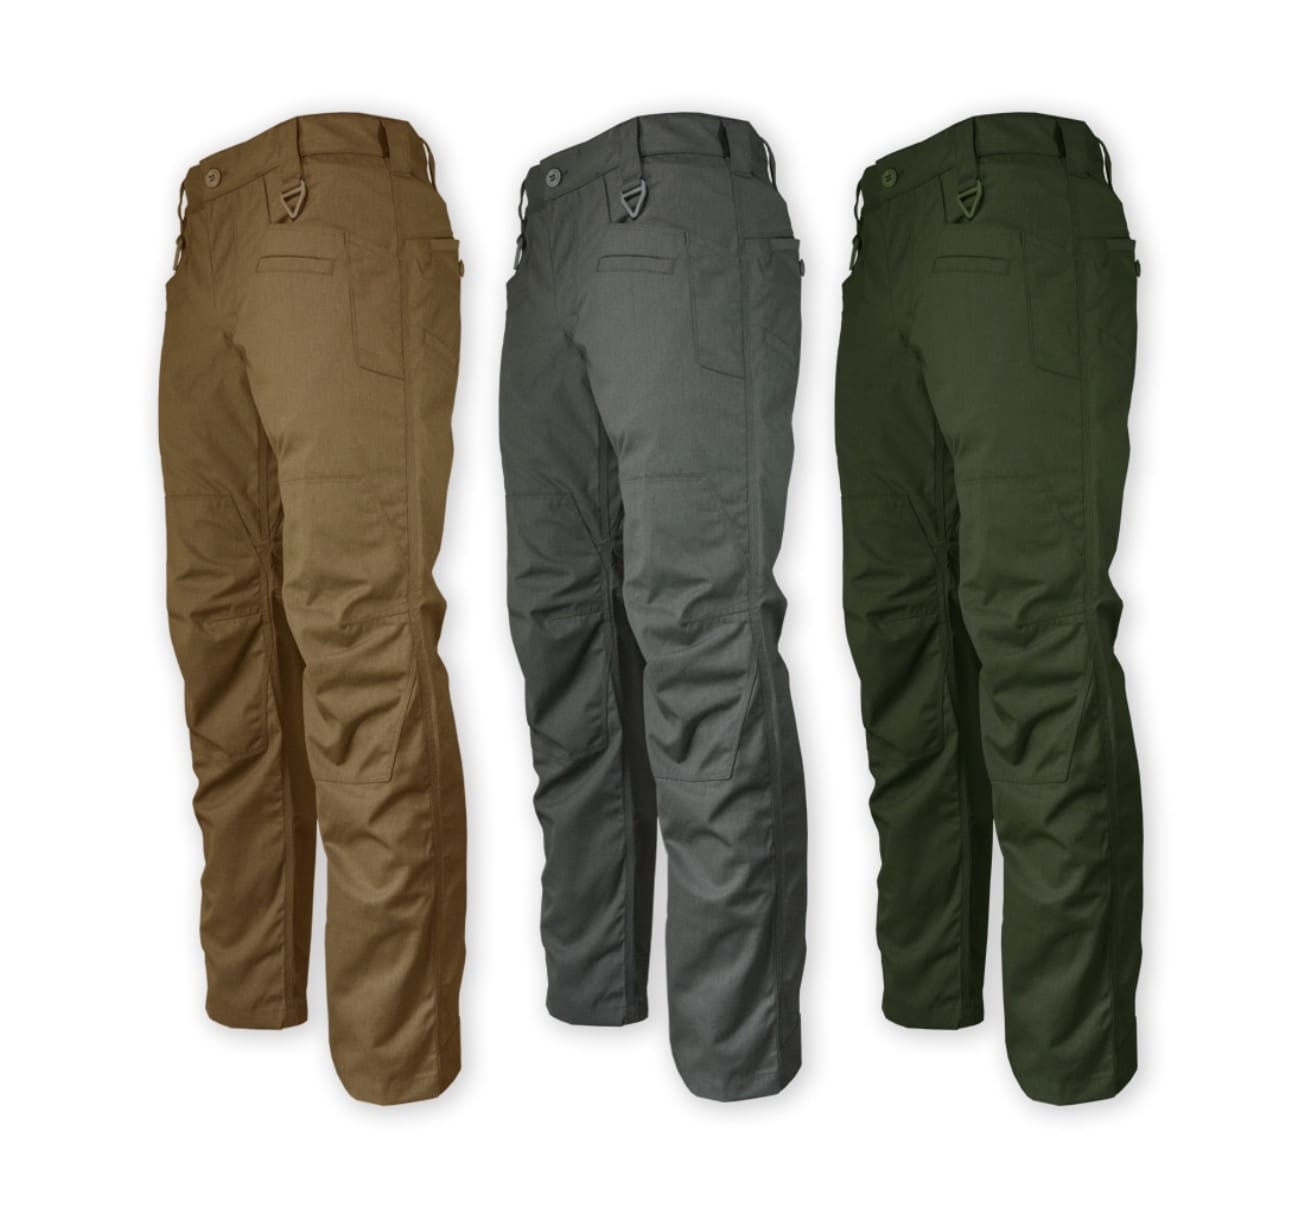 Prometheus Design Werx – Raider Field Pant - Soldier Systems Daily